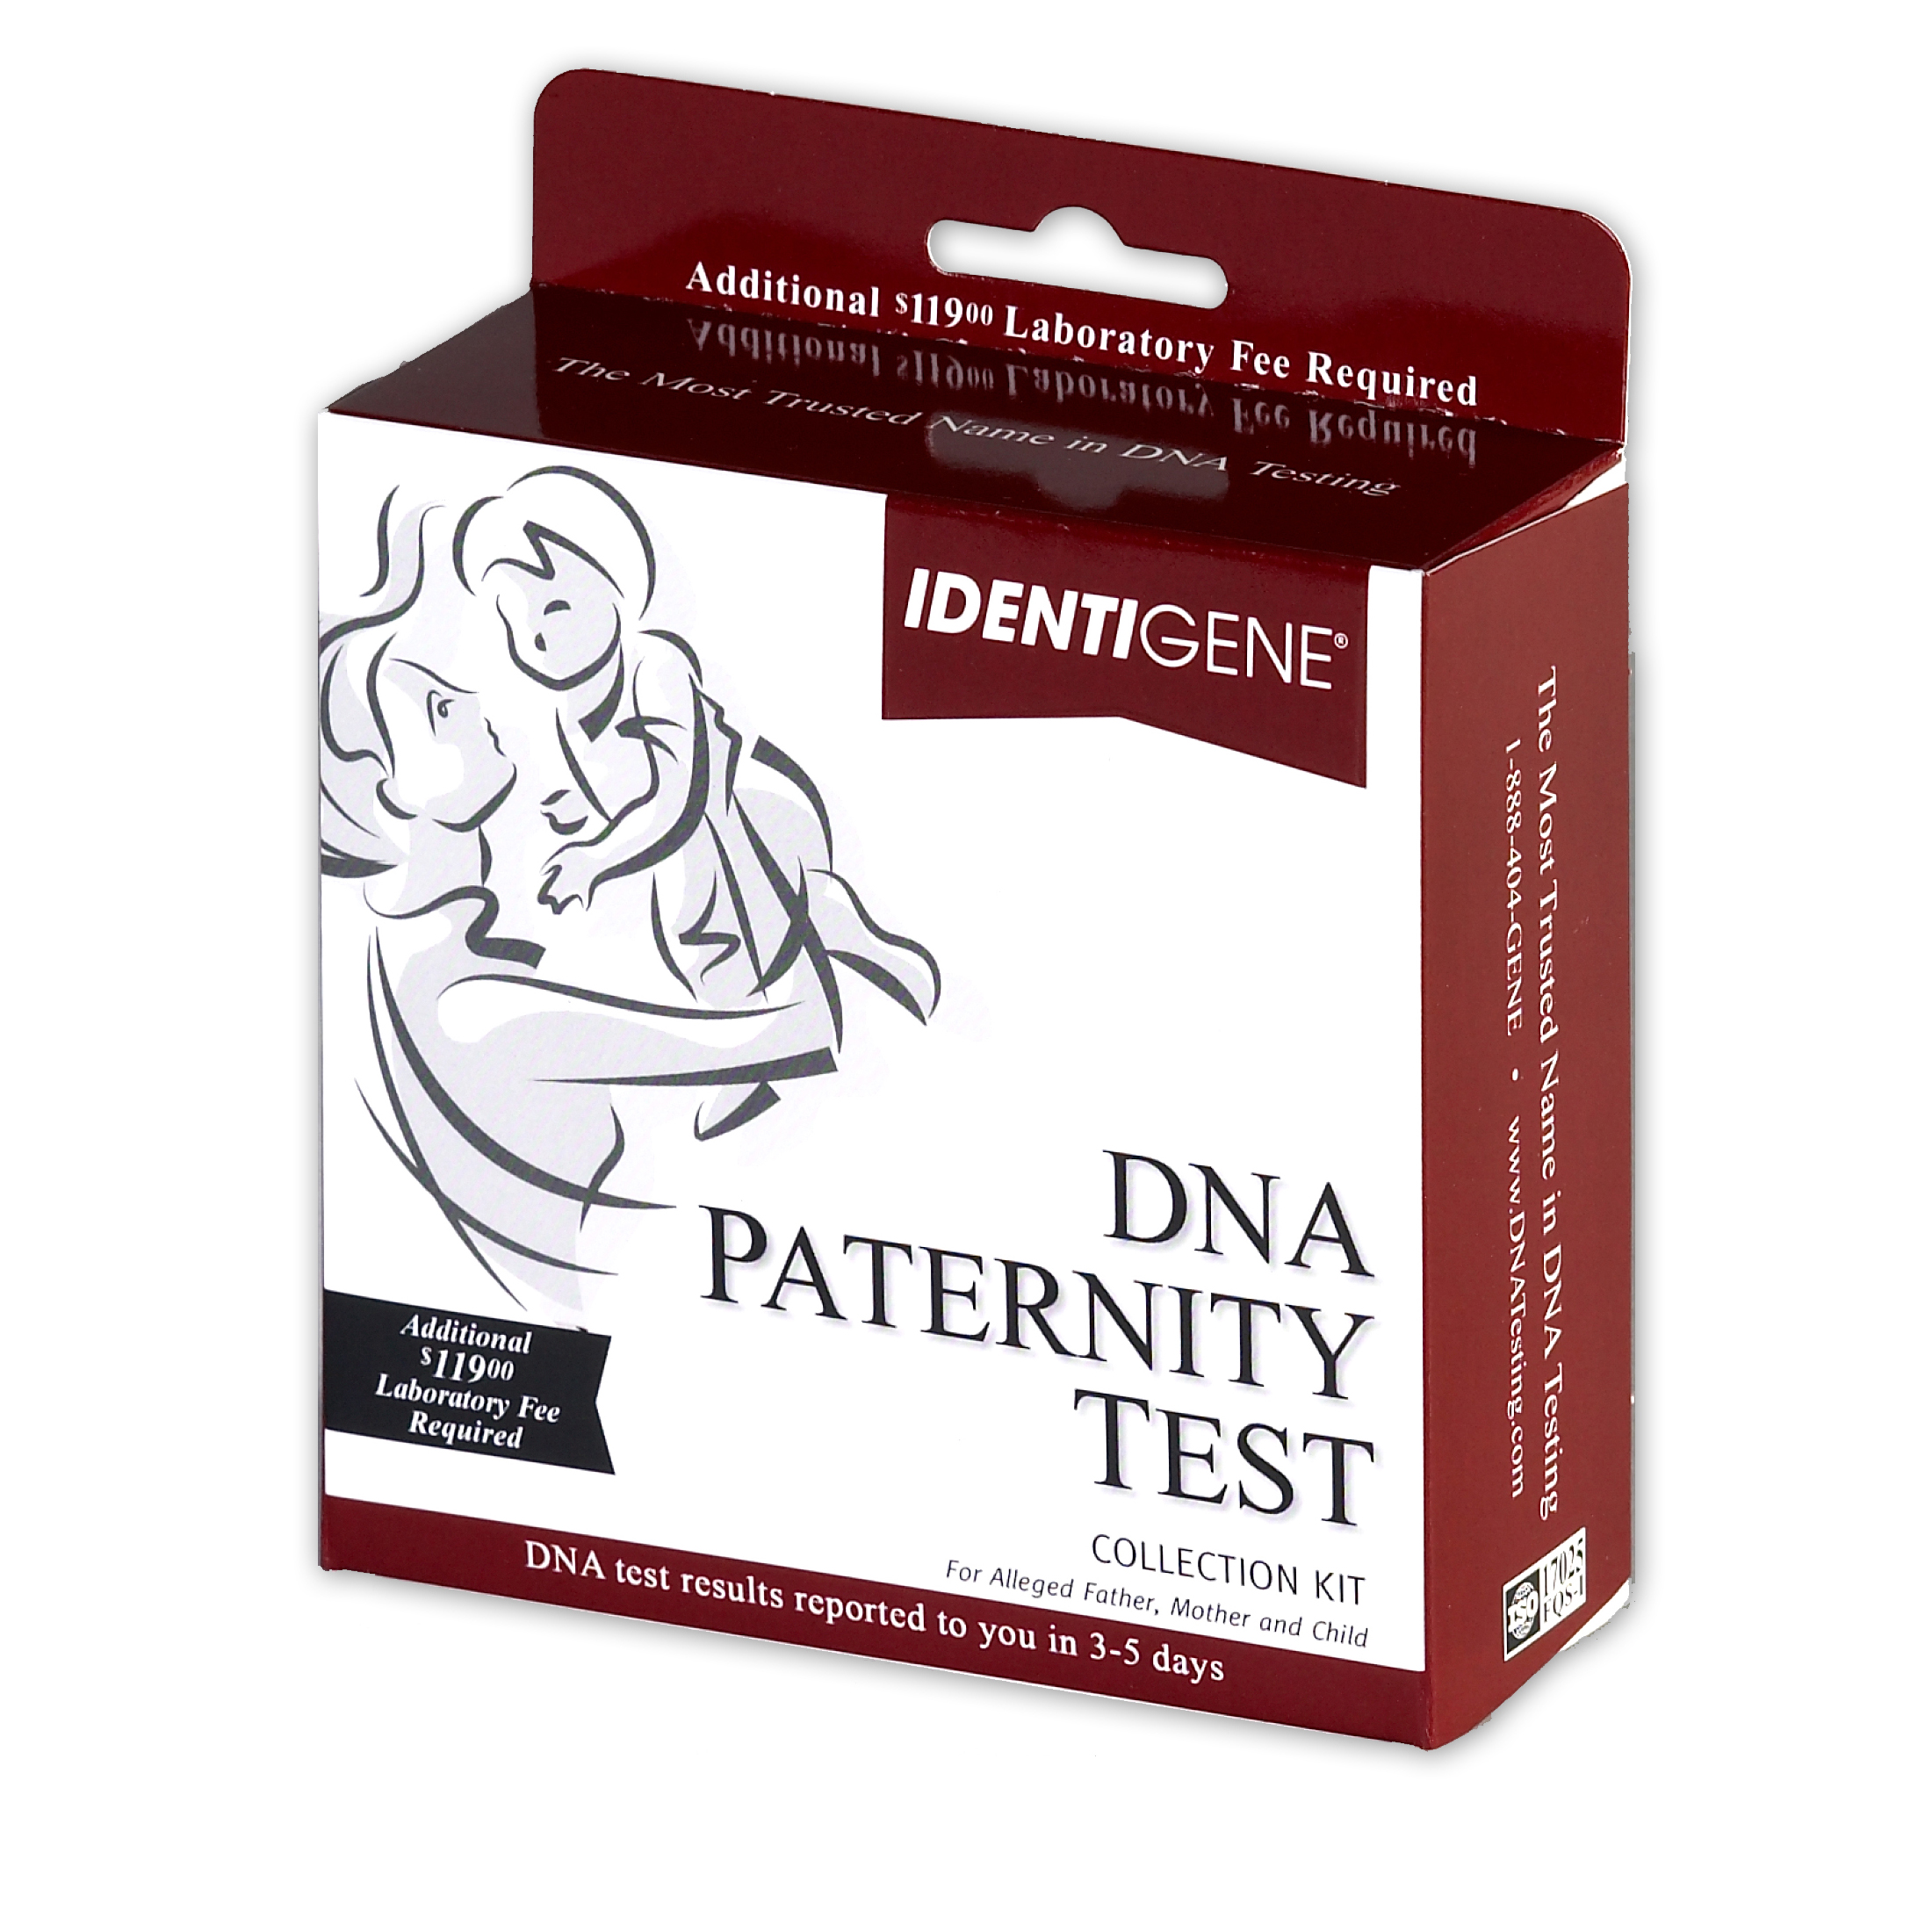 Paternity Test. Paternity Test Results paper. Test collection